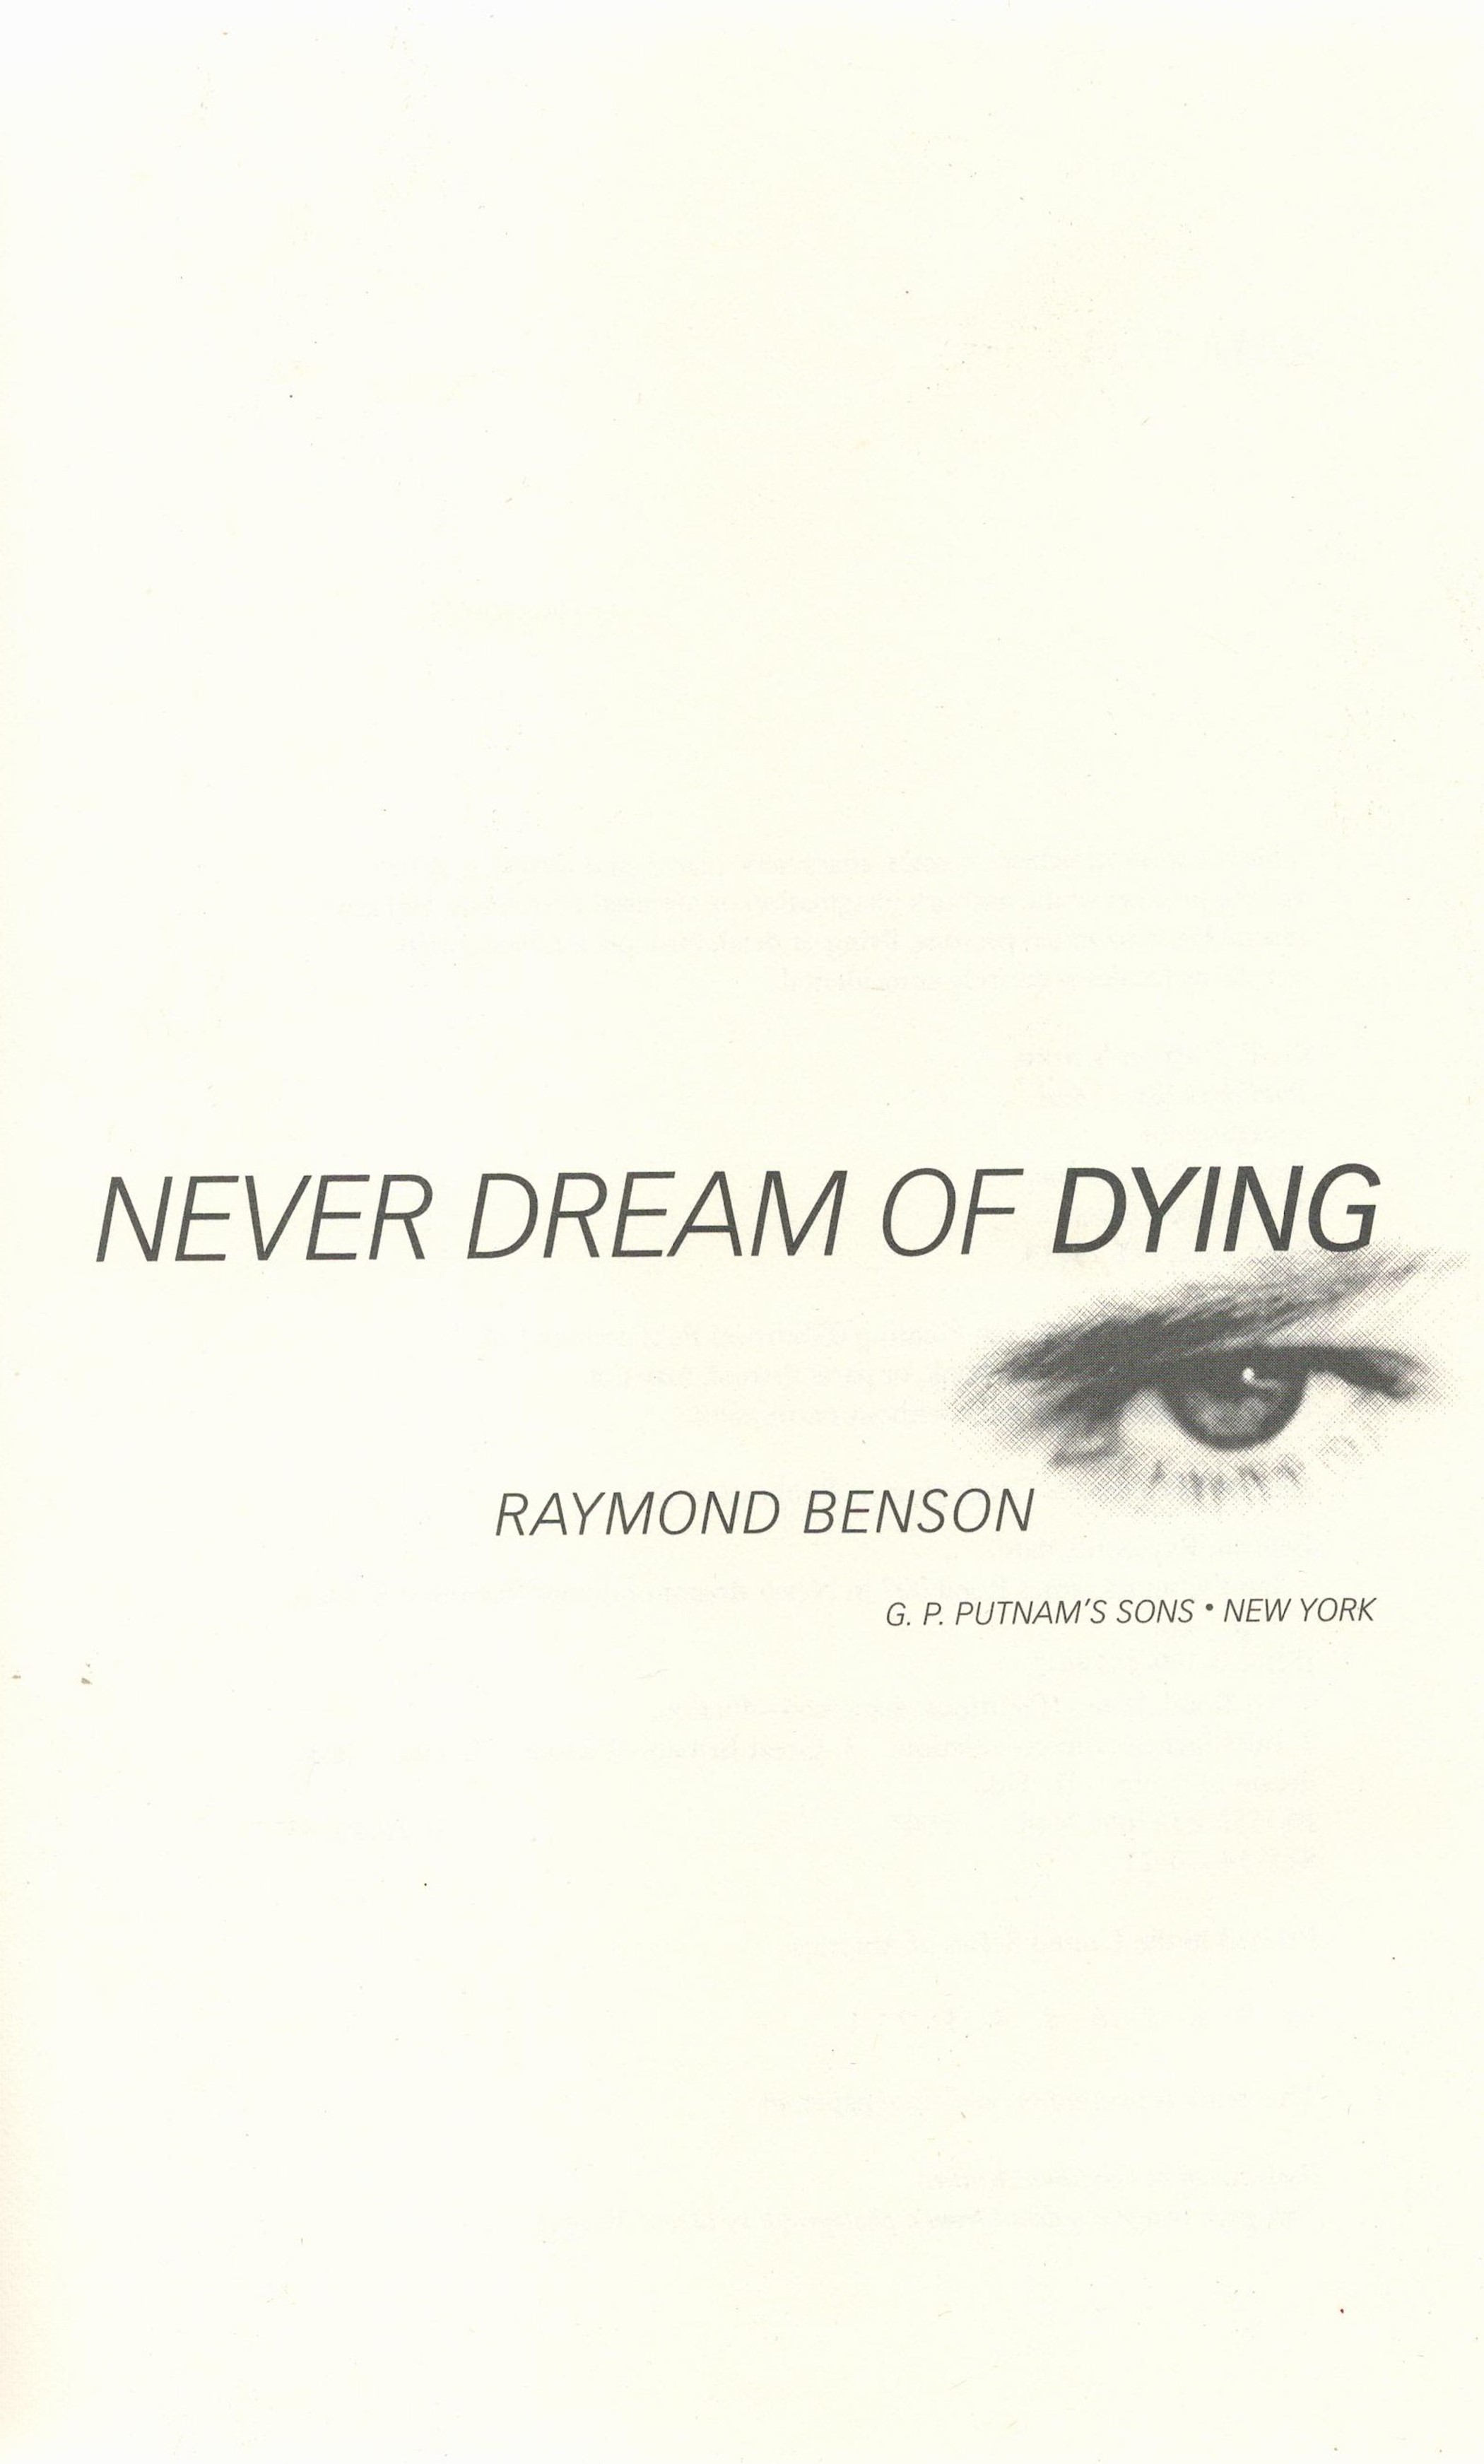 James Bond Never Dream of Dying by Raymond Benson First Edition 2001 Hardback Book published by G